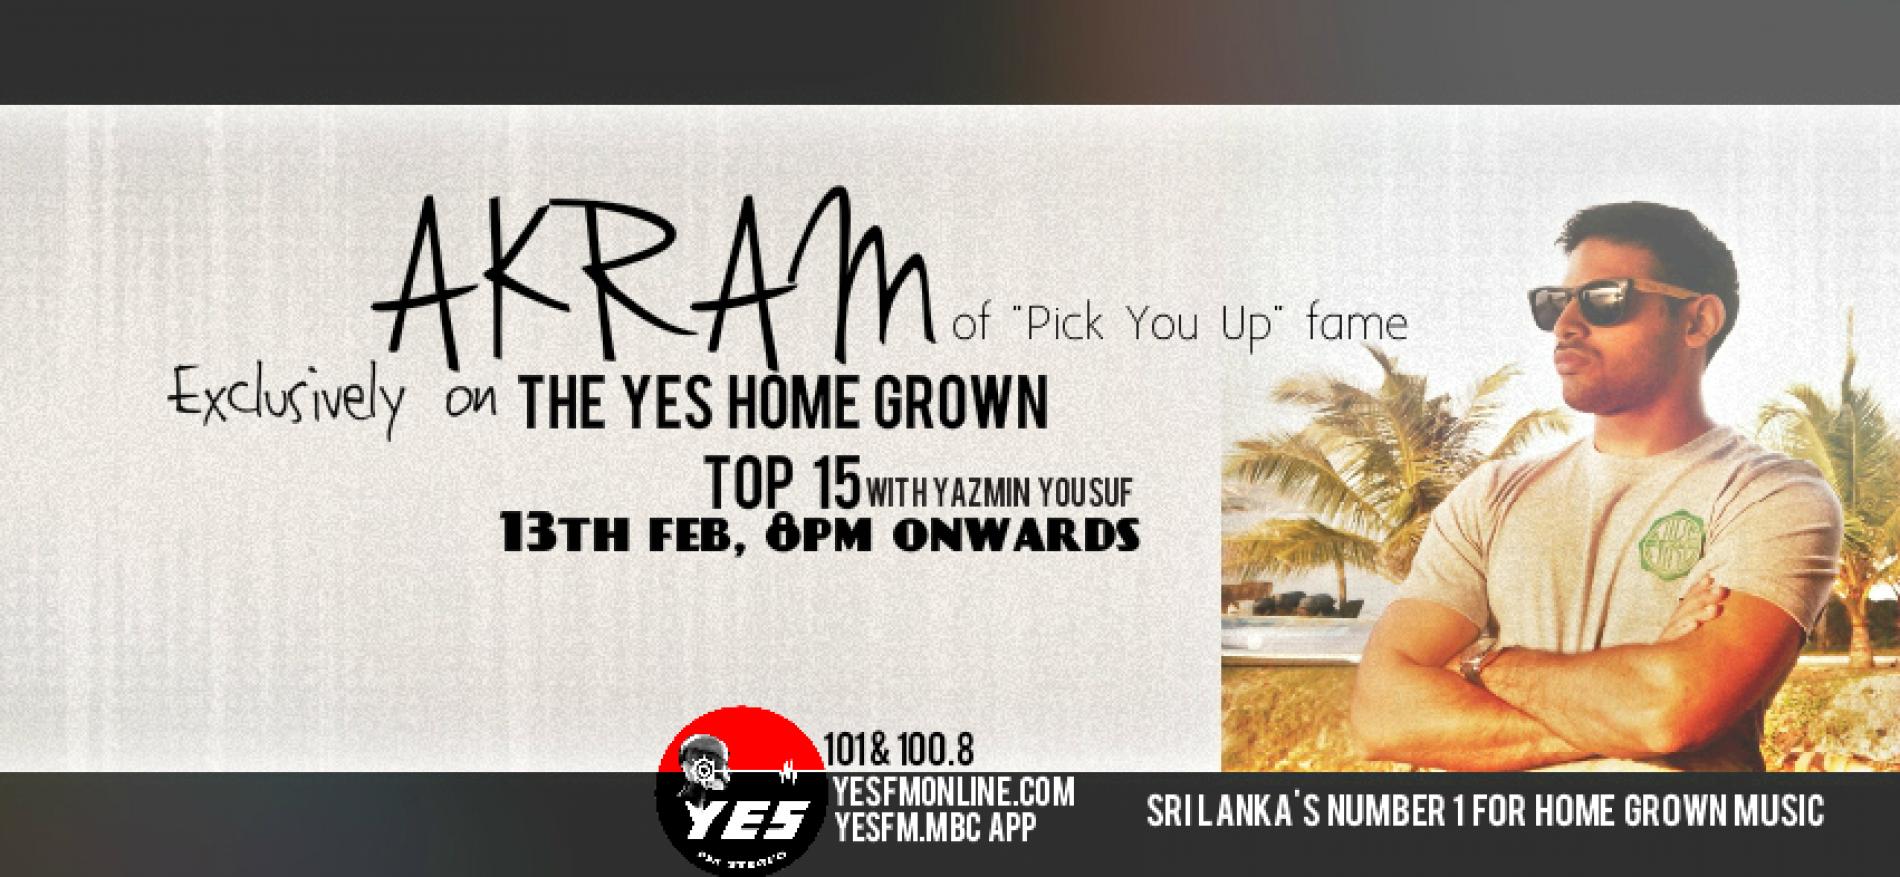 Akram On The YES Home Grown Top 15